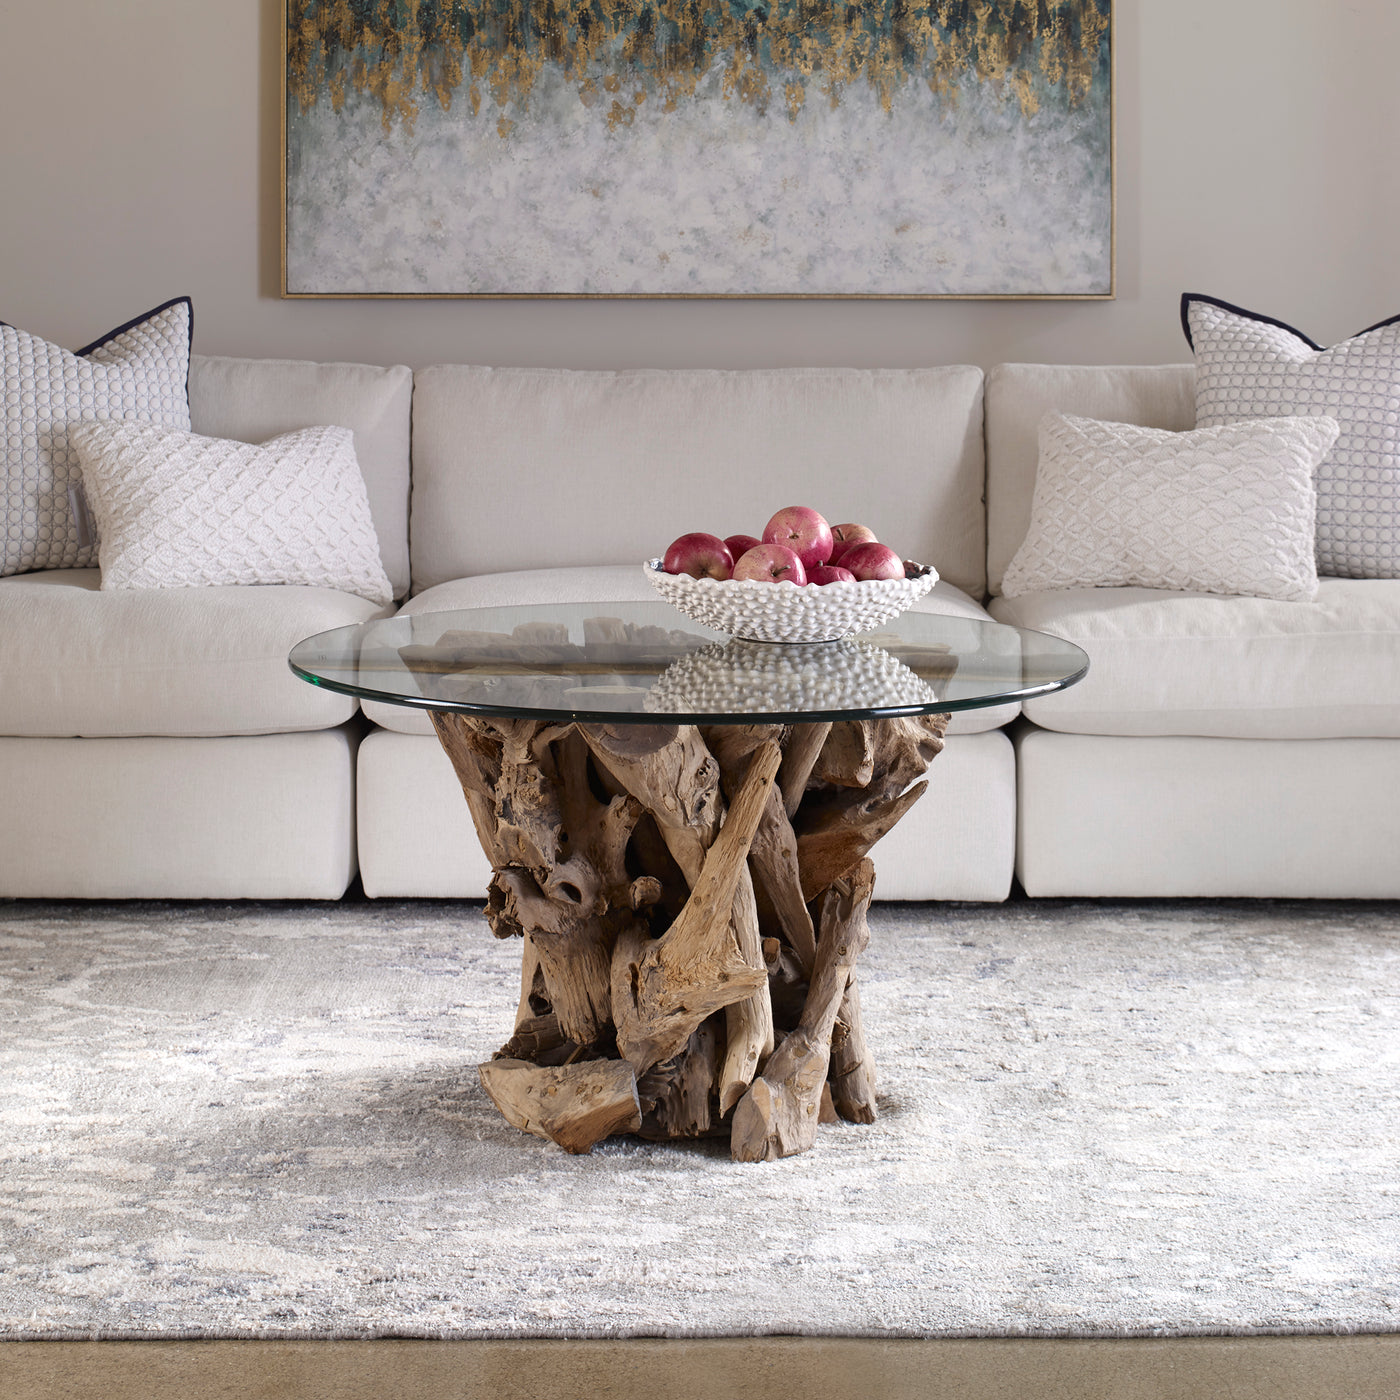 Natural, Unfinished Teak Driftwood Sculpted Into A Sturdy Table With A Clear Glass Top.